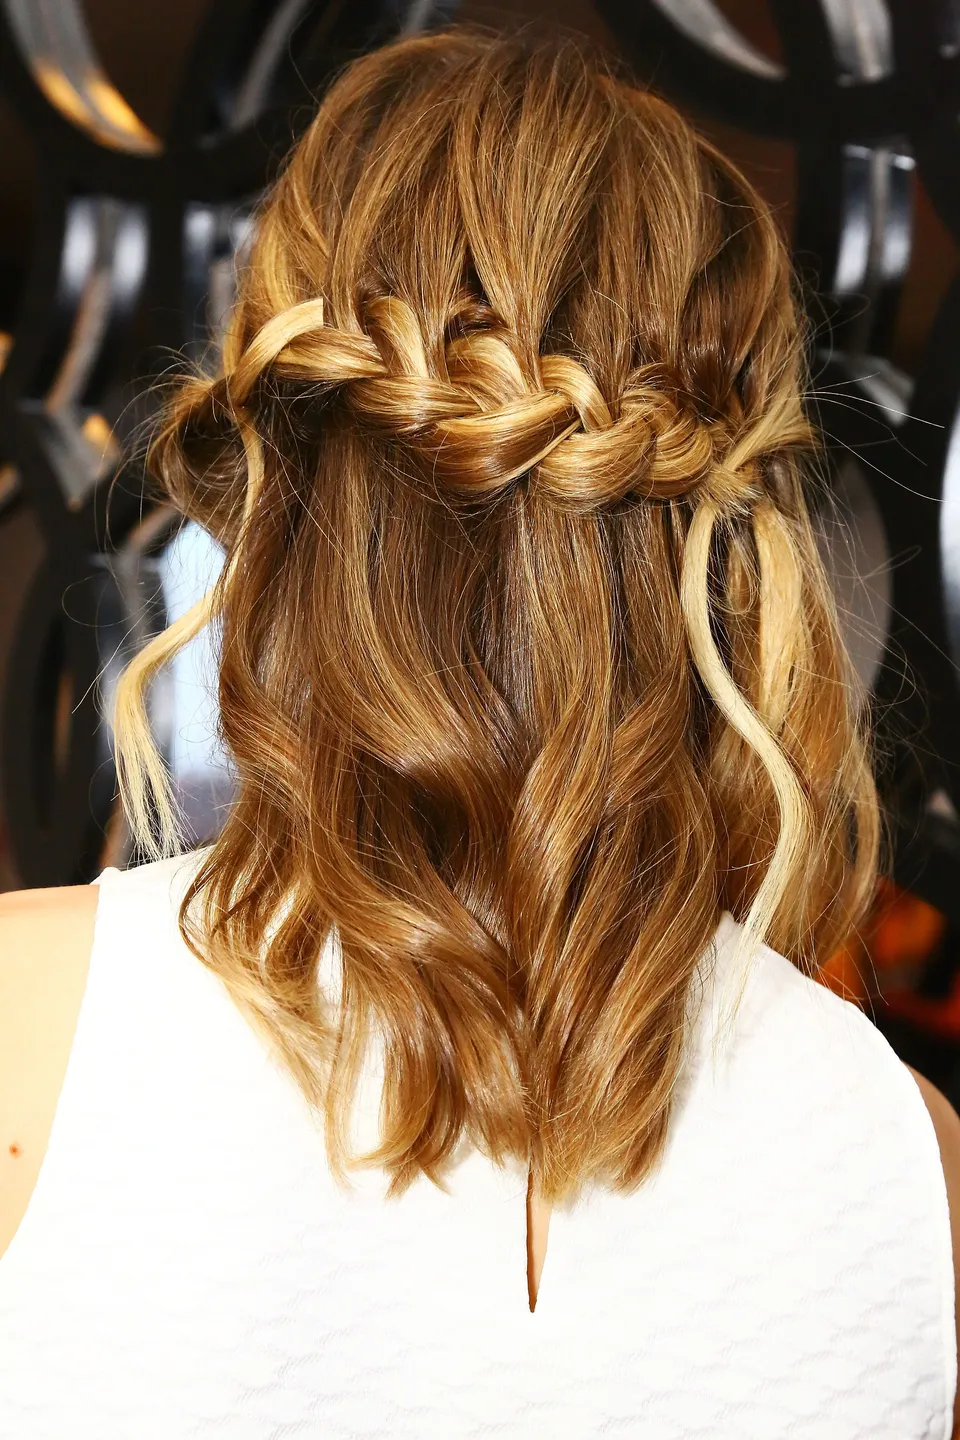 15 Photos That'll Make You Want To Wear French Braids Every Day | HuffPost  Life